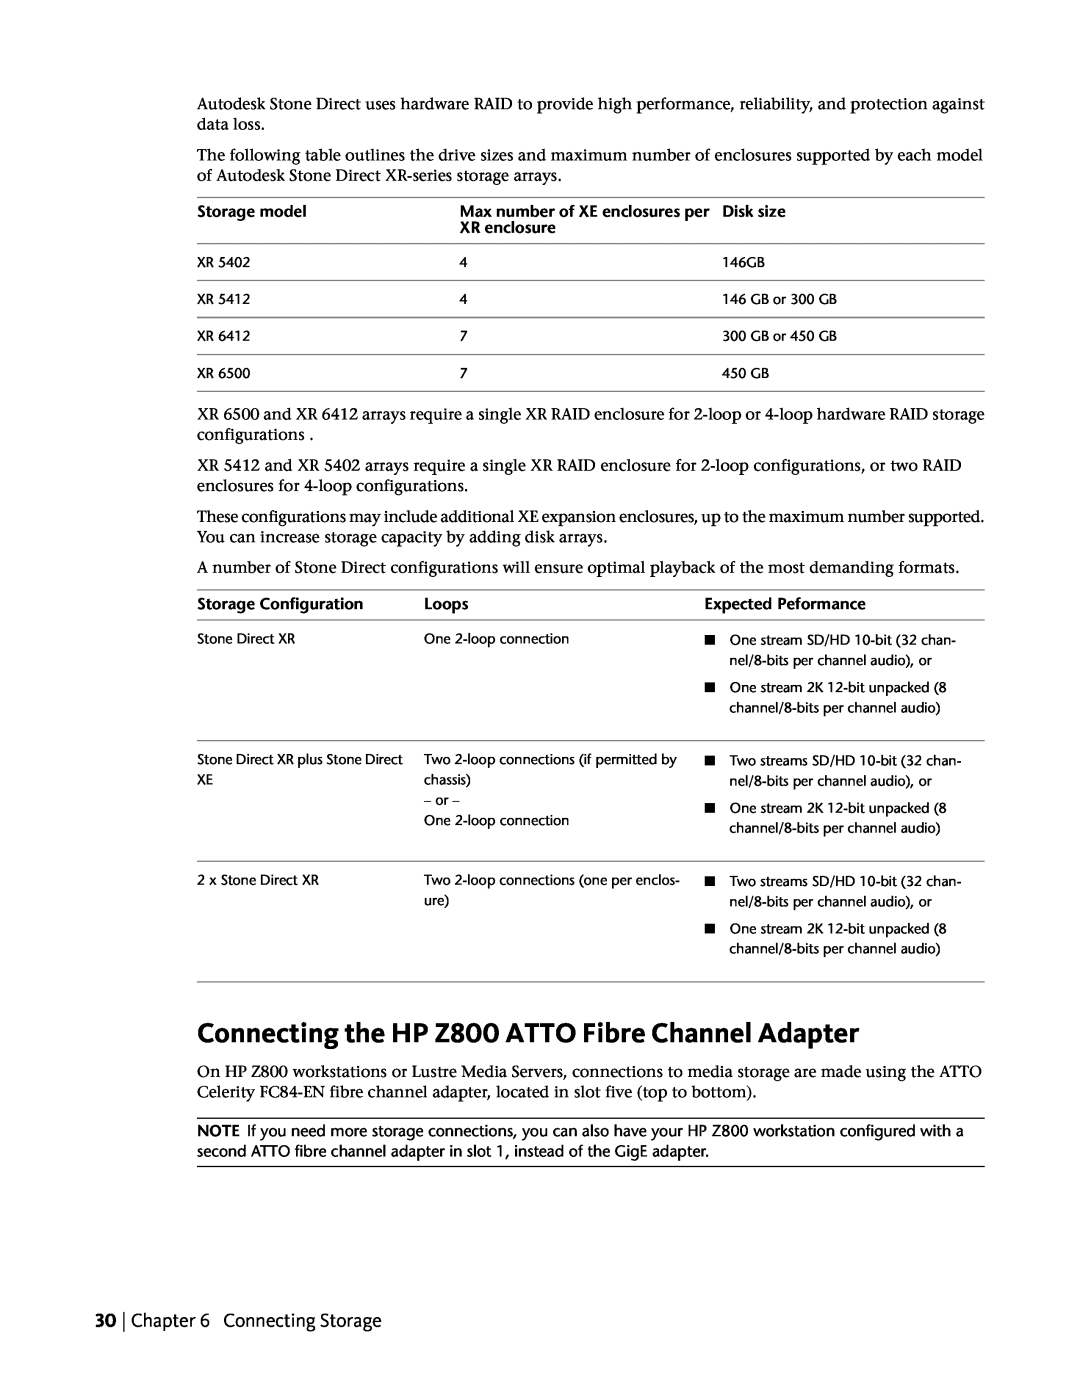 HP manual Connecting the HP Z800 ATTO Fibre Channel Adapter, Connecting Storage 